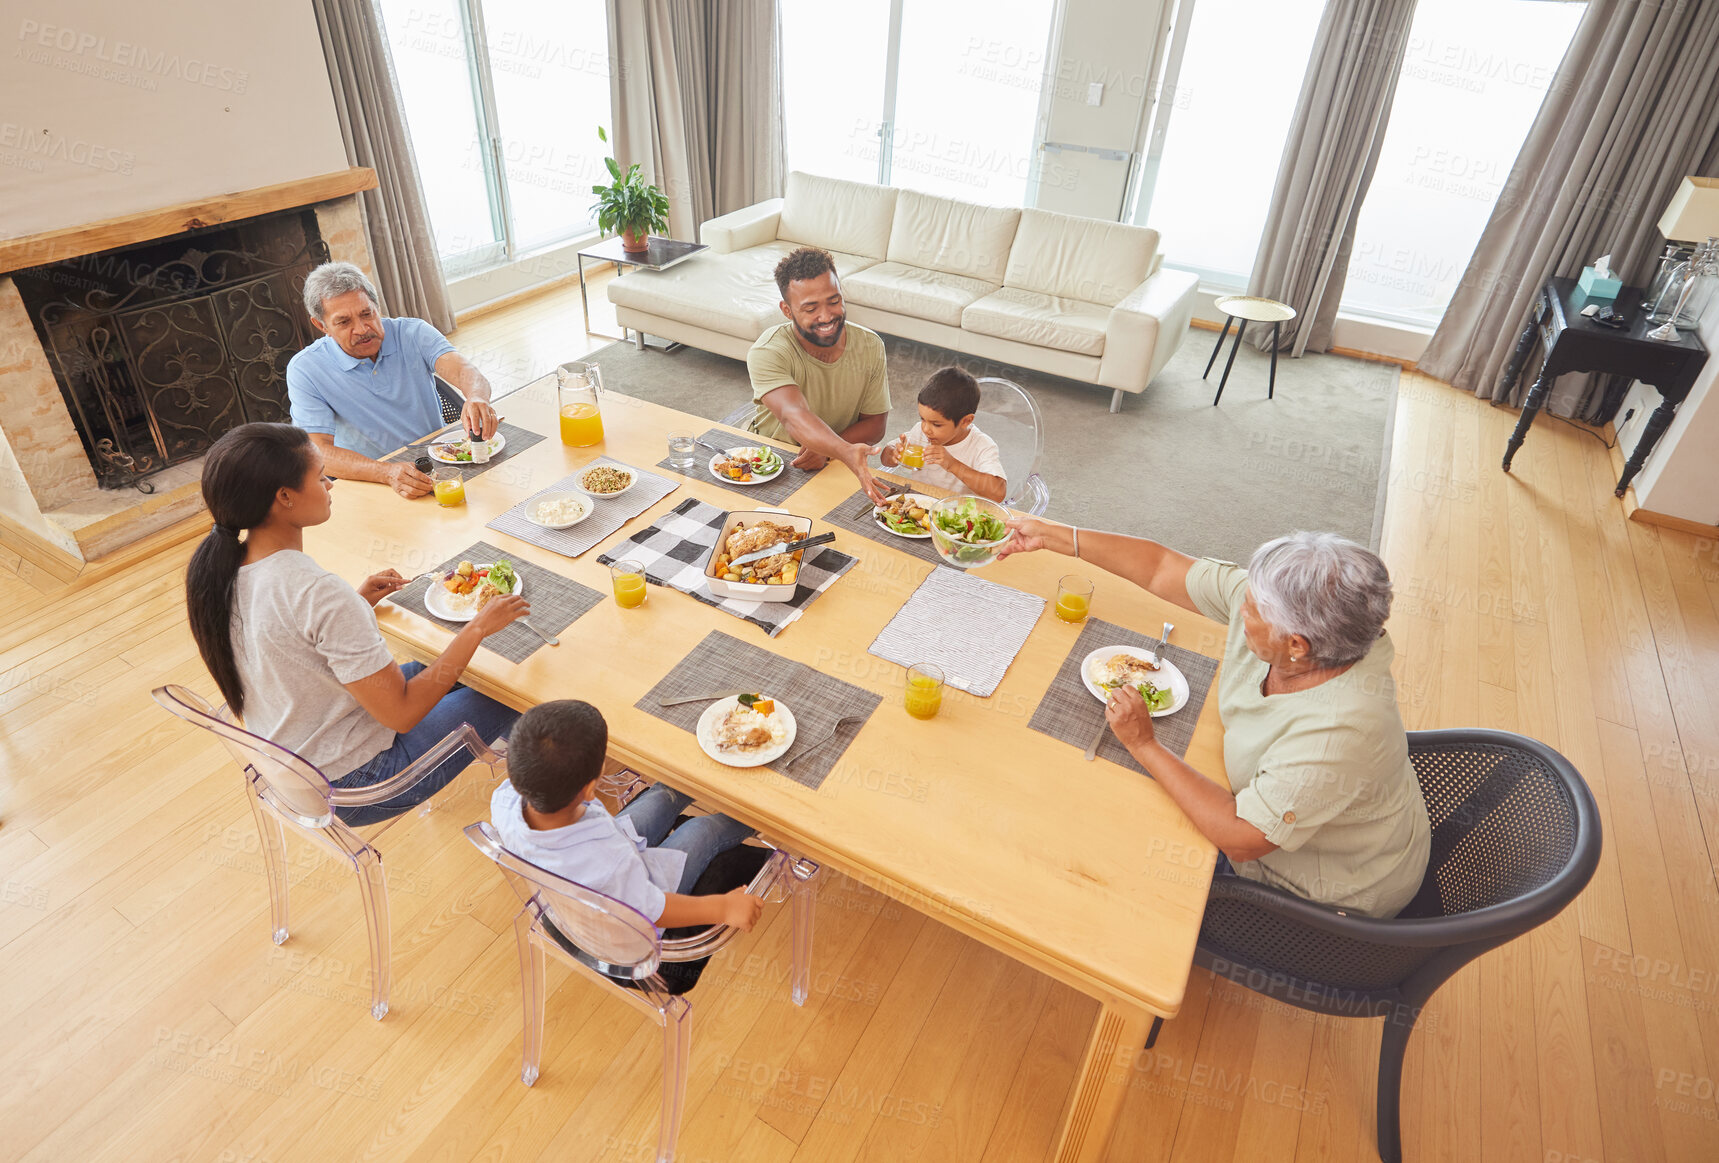 Buy stock photo Overhead view of a mixed race family sitting at a table having lunch  in the lounge at home. Hispanic grandparents having a meal with their kids and grandkids at home